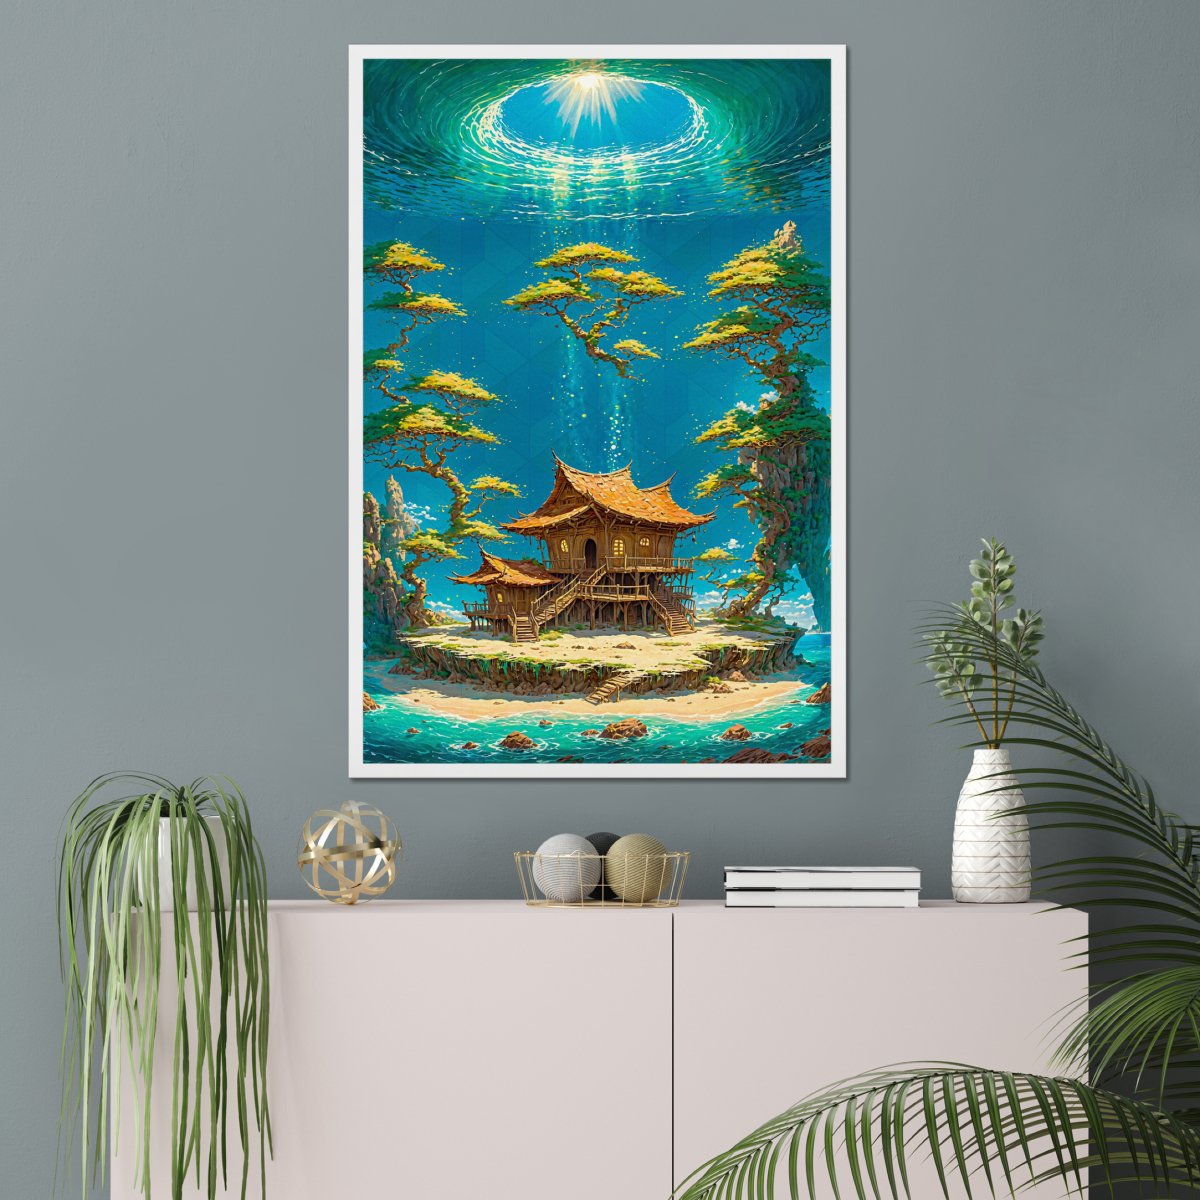 Uplifting paradise - Art print - Poster - Ever colorful